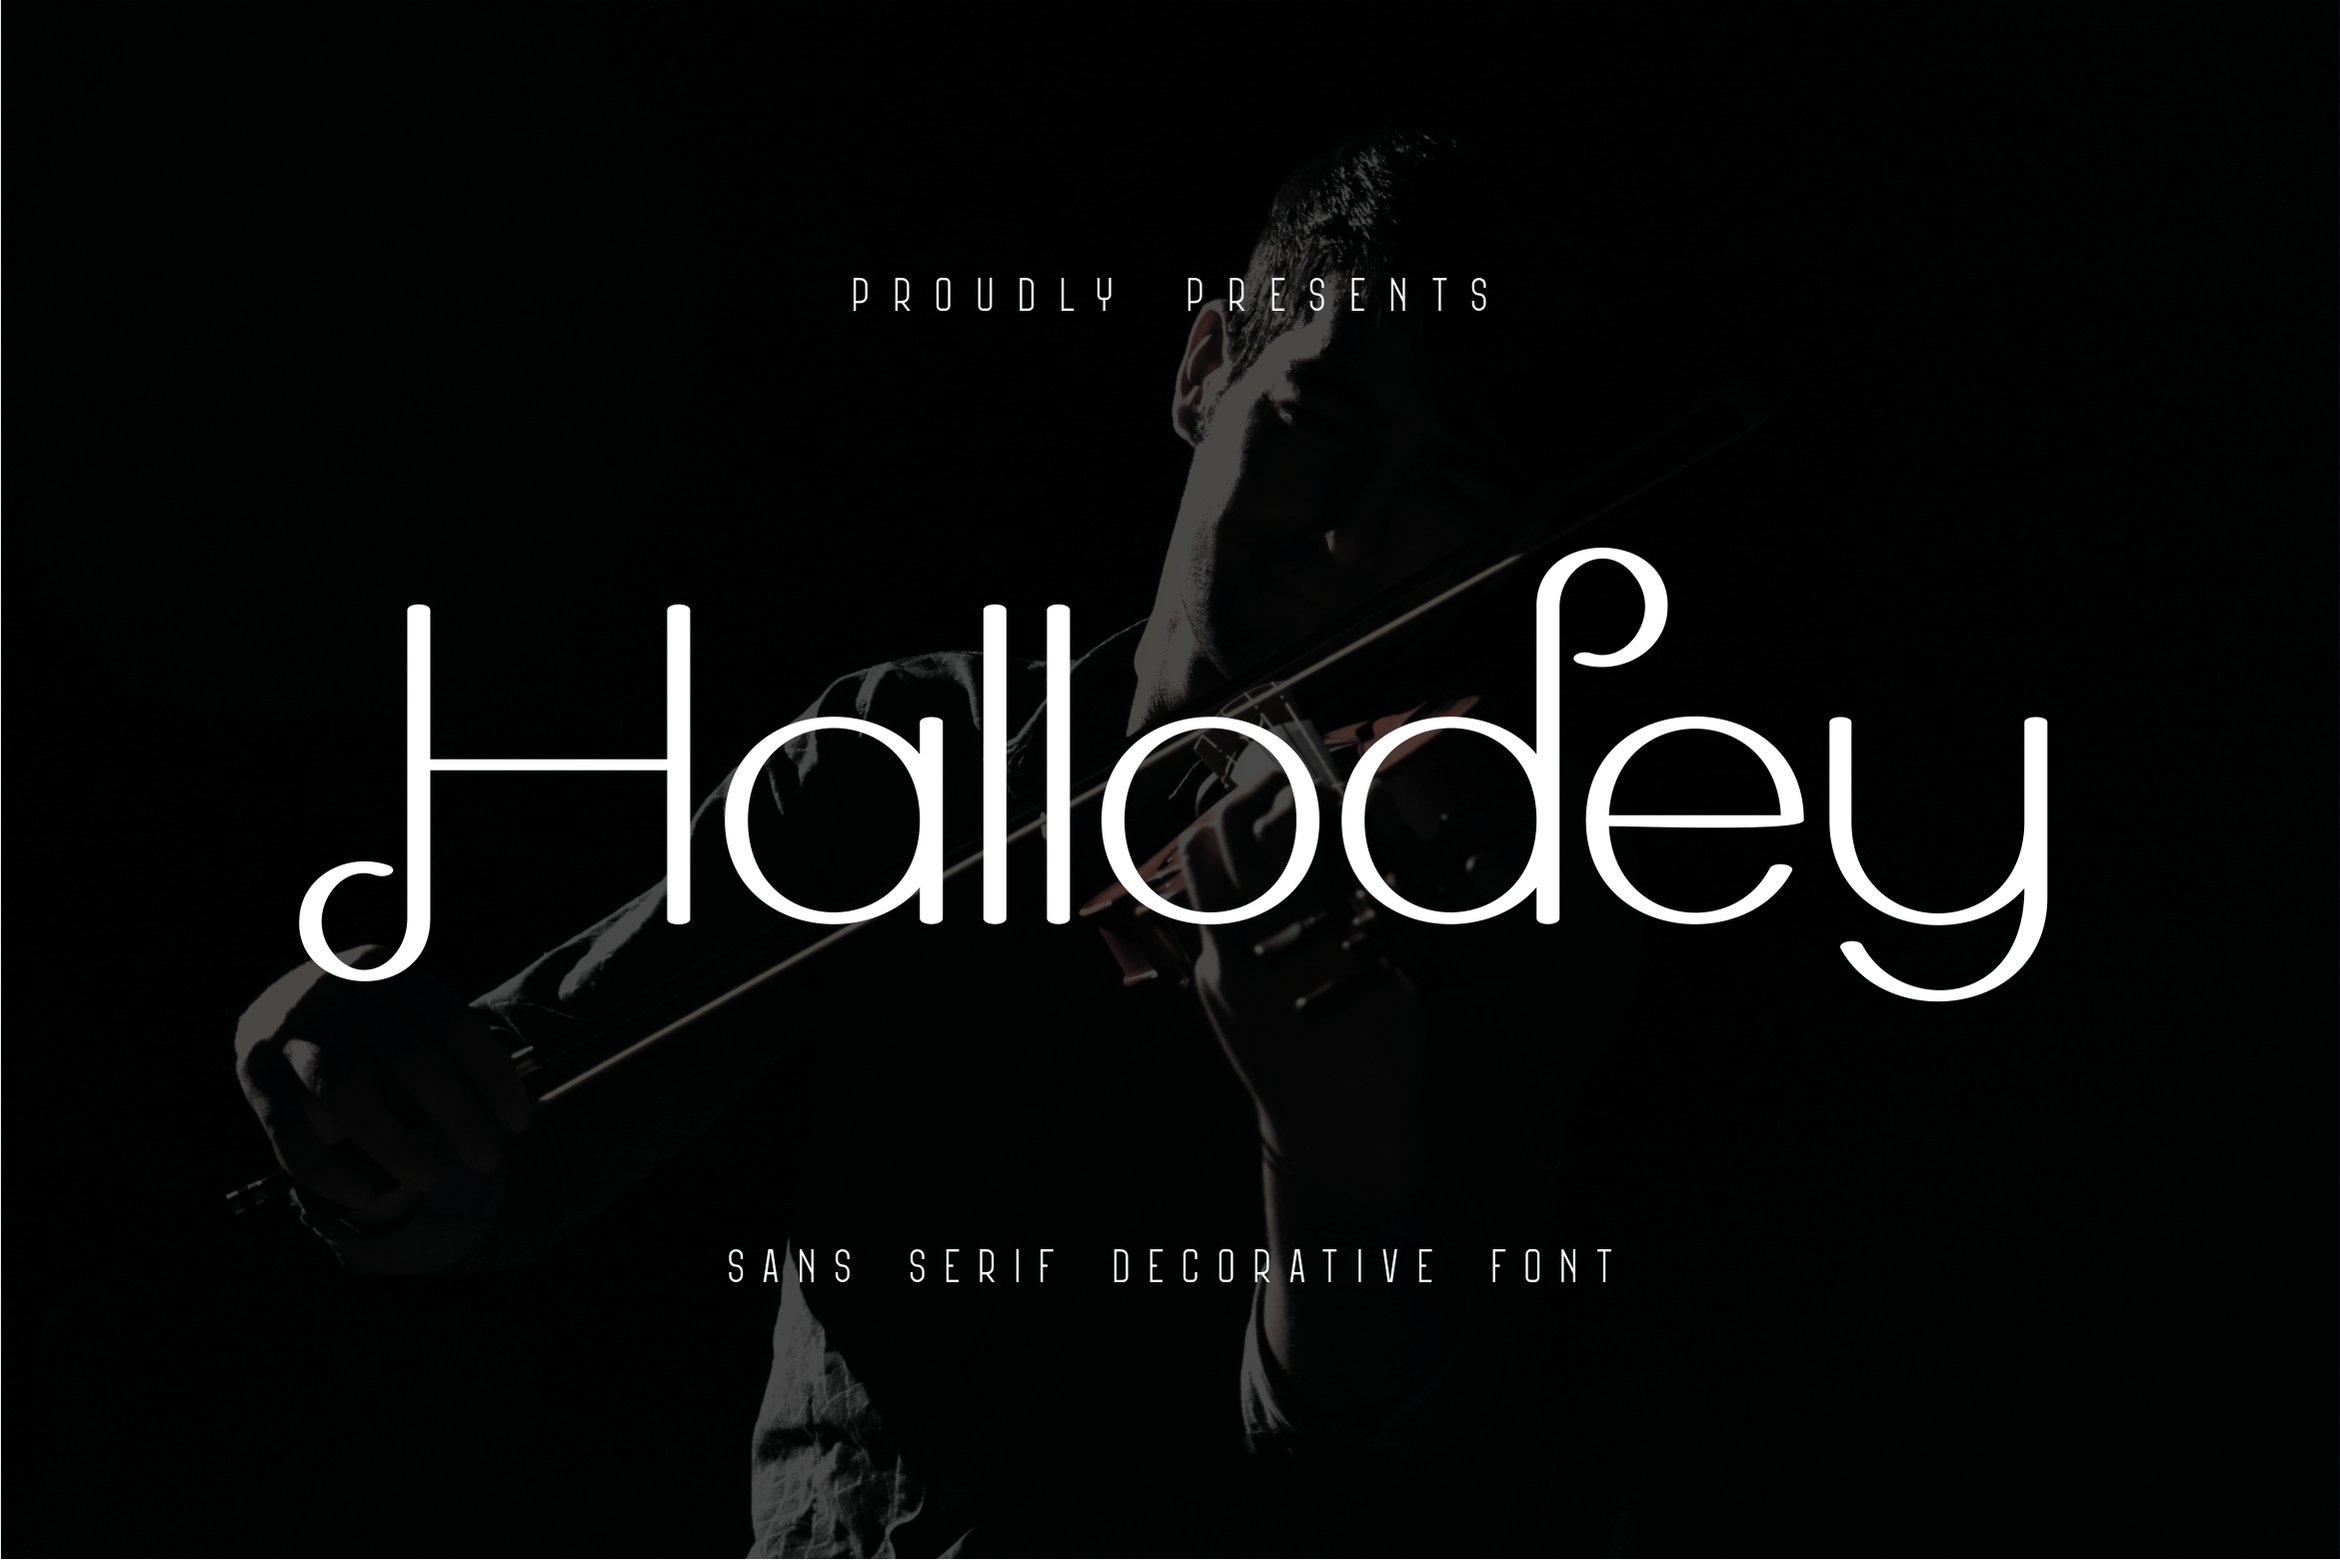 Hallodey Font cover image.